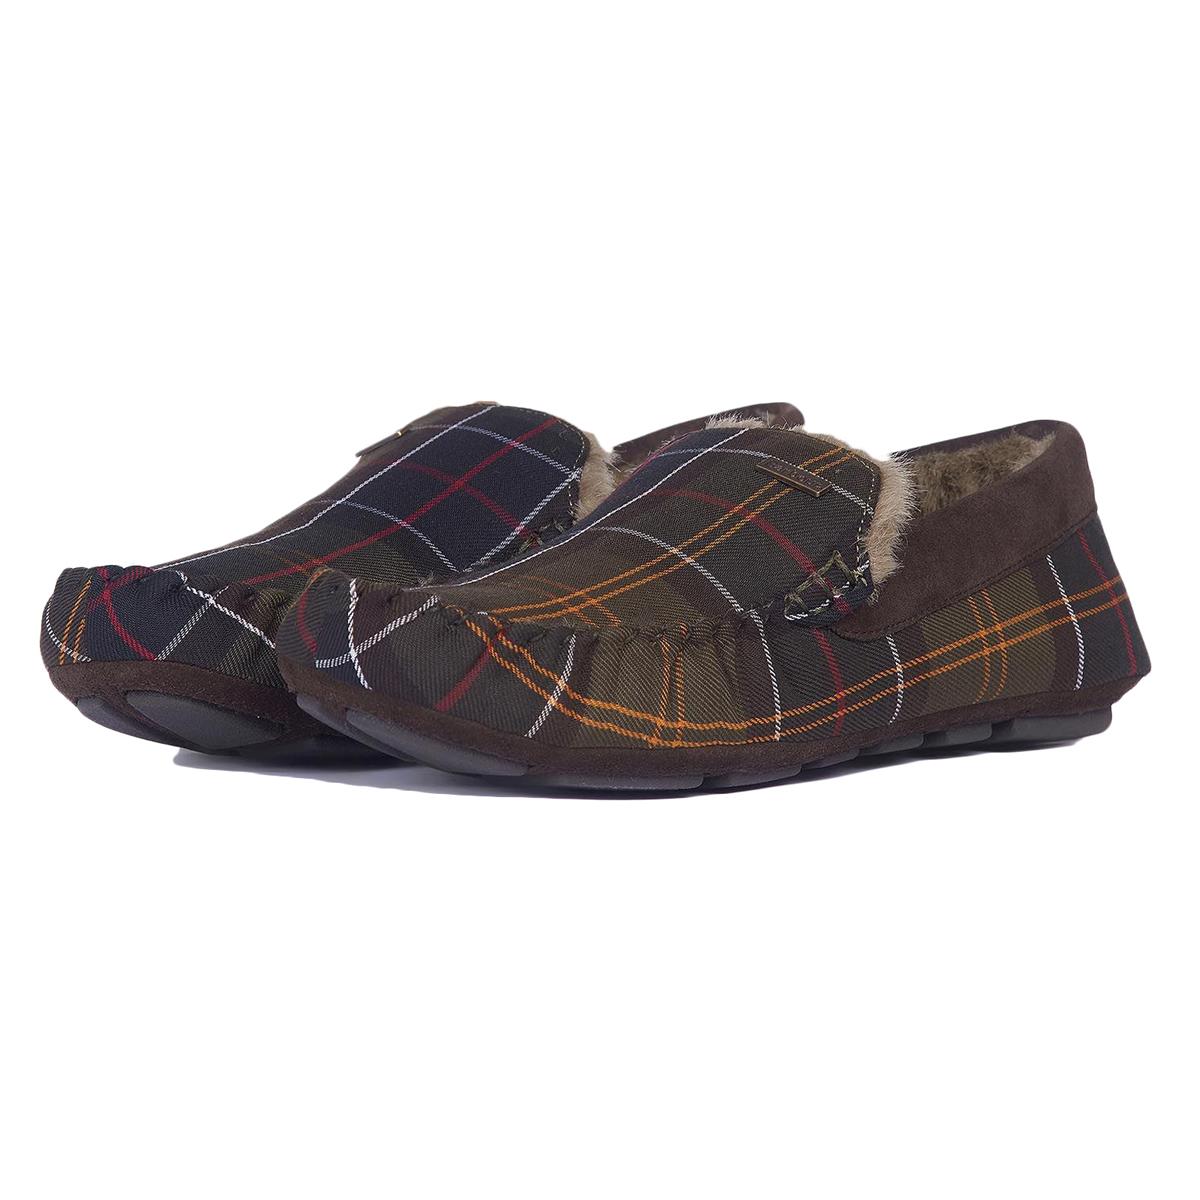 Barbour Monty Slippers Questions & Answers